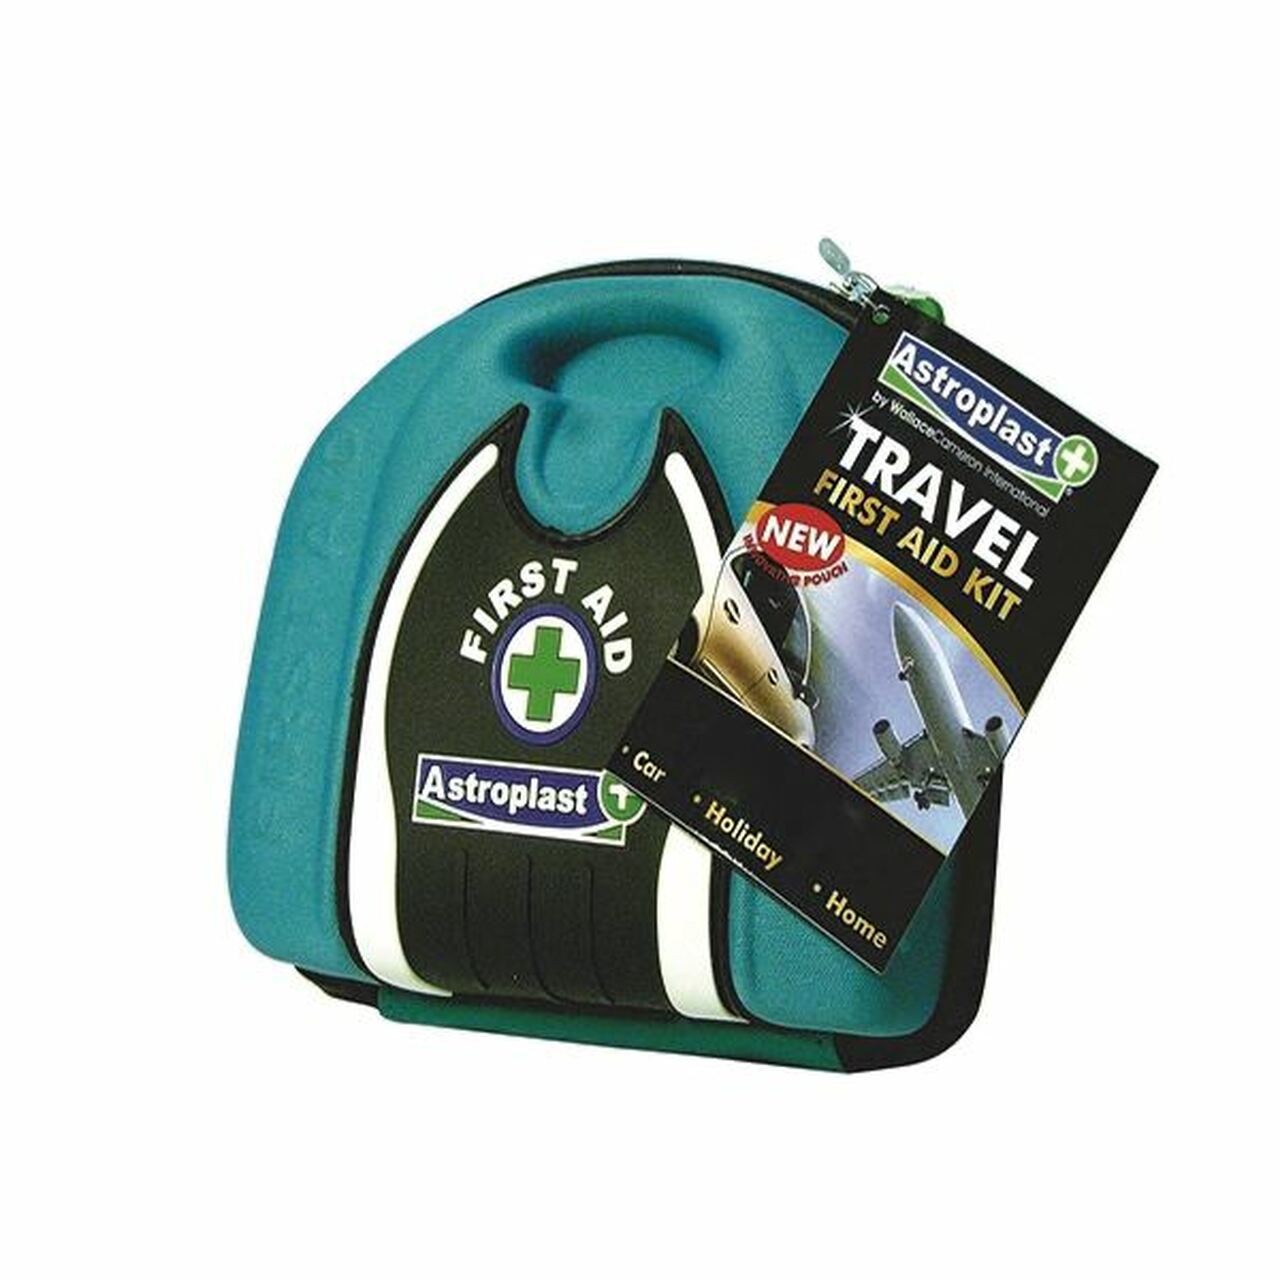 Astroplast Travel First Aid Kit Pouch